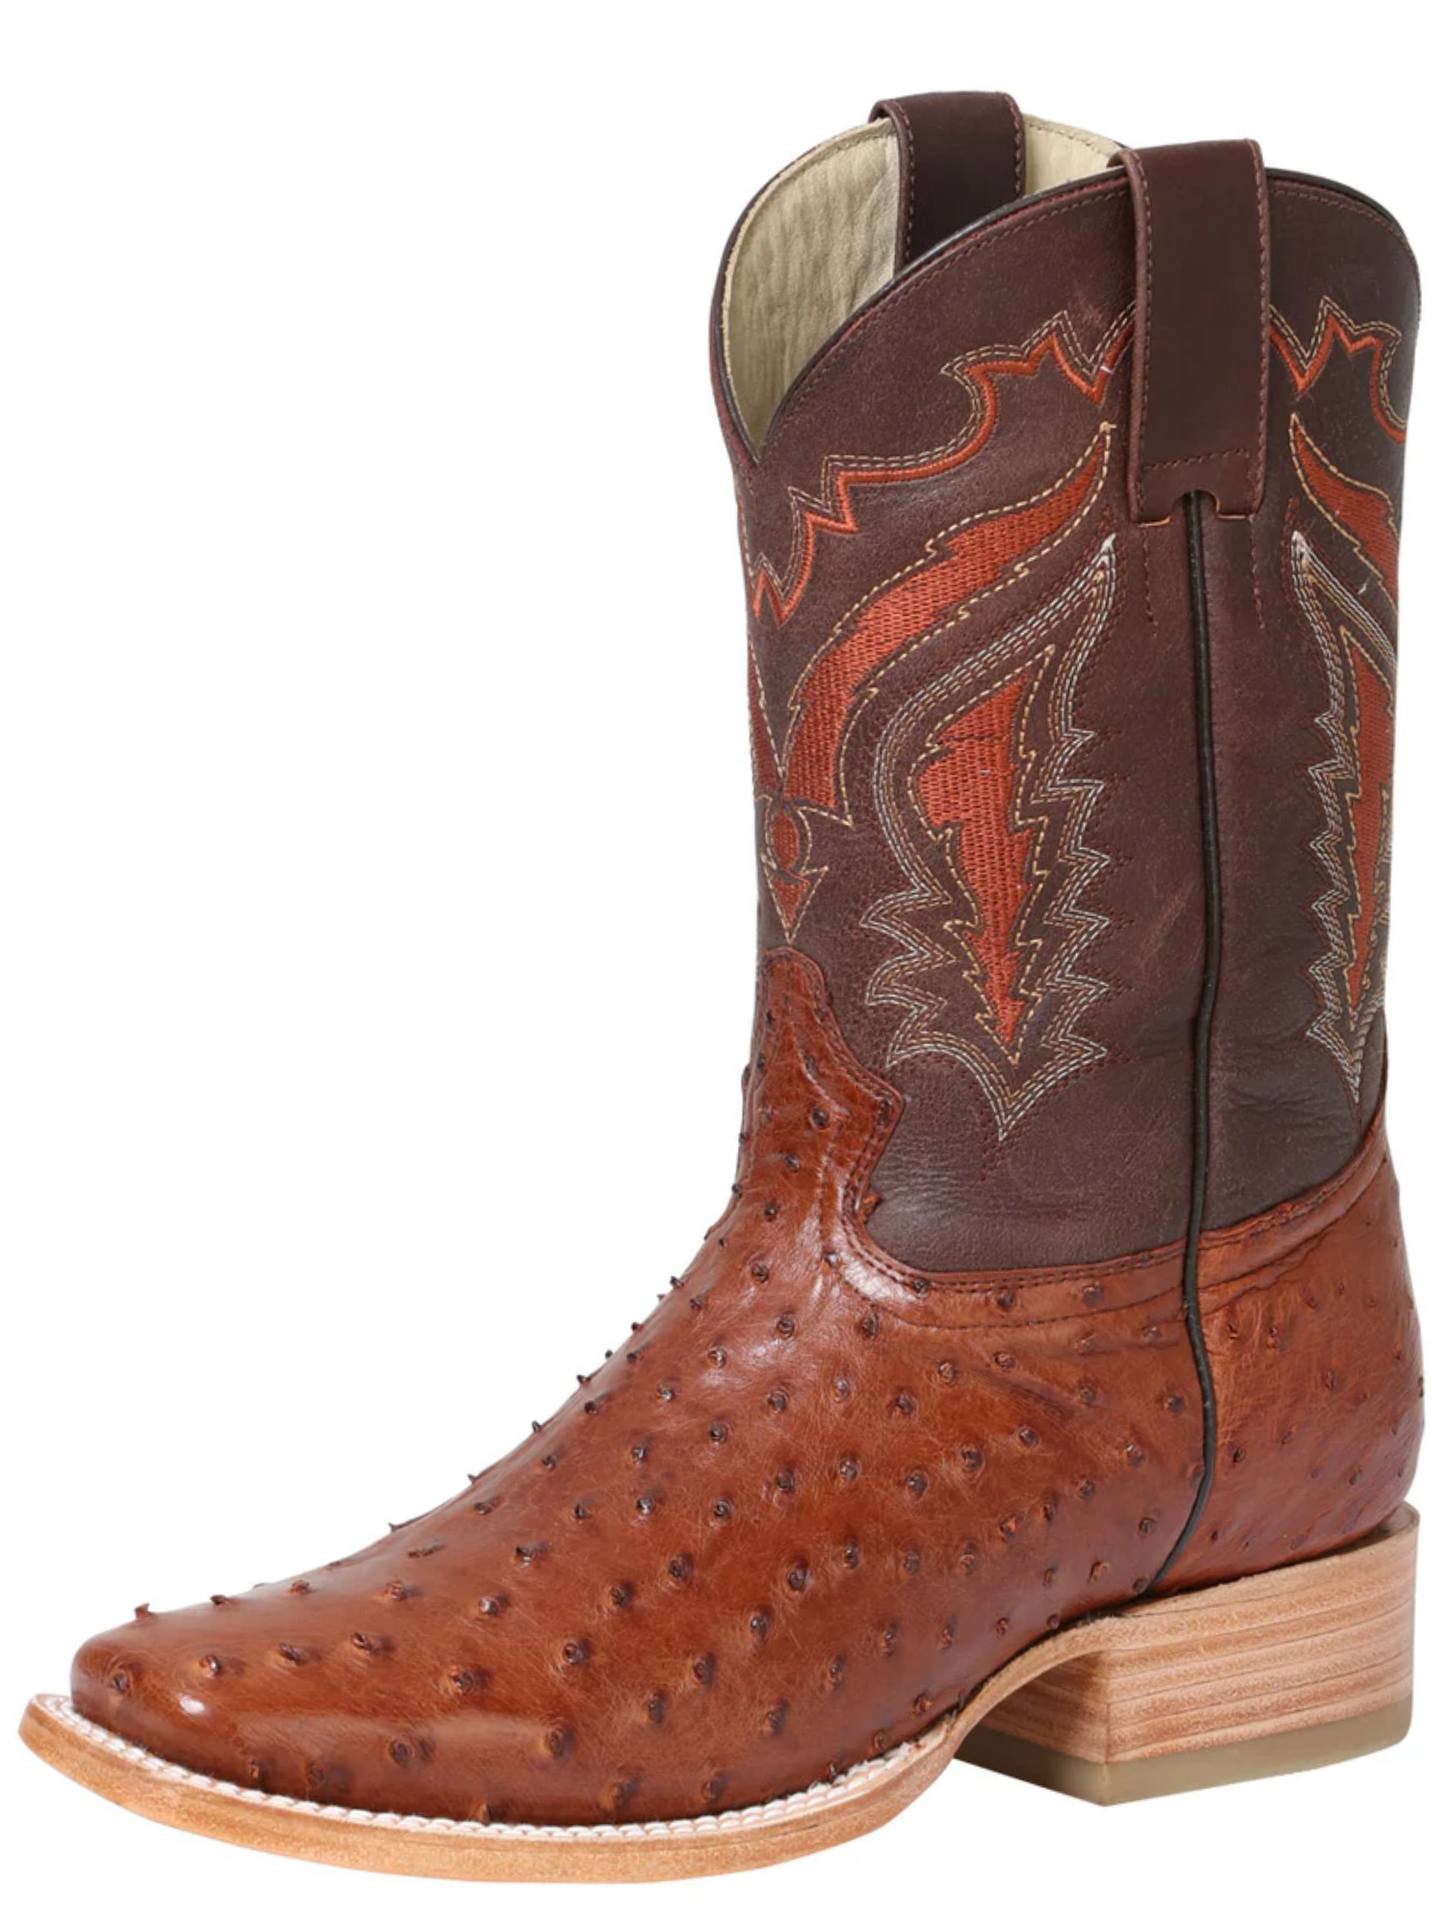 Original Ostrich Rodeo Exotic Cowboy Boots for Men '100 Years' - ID: 42770